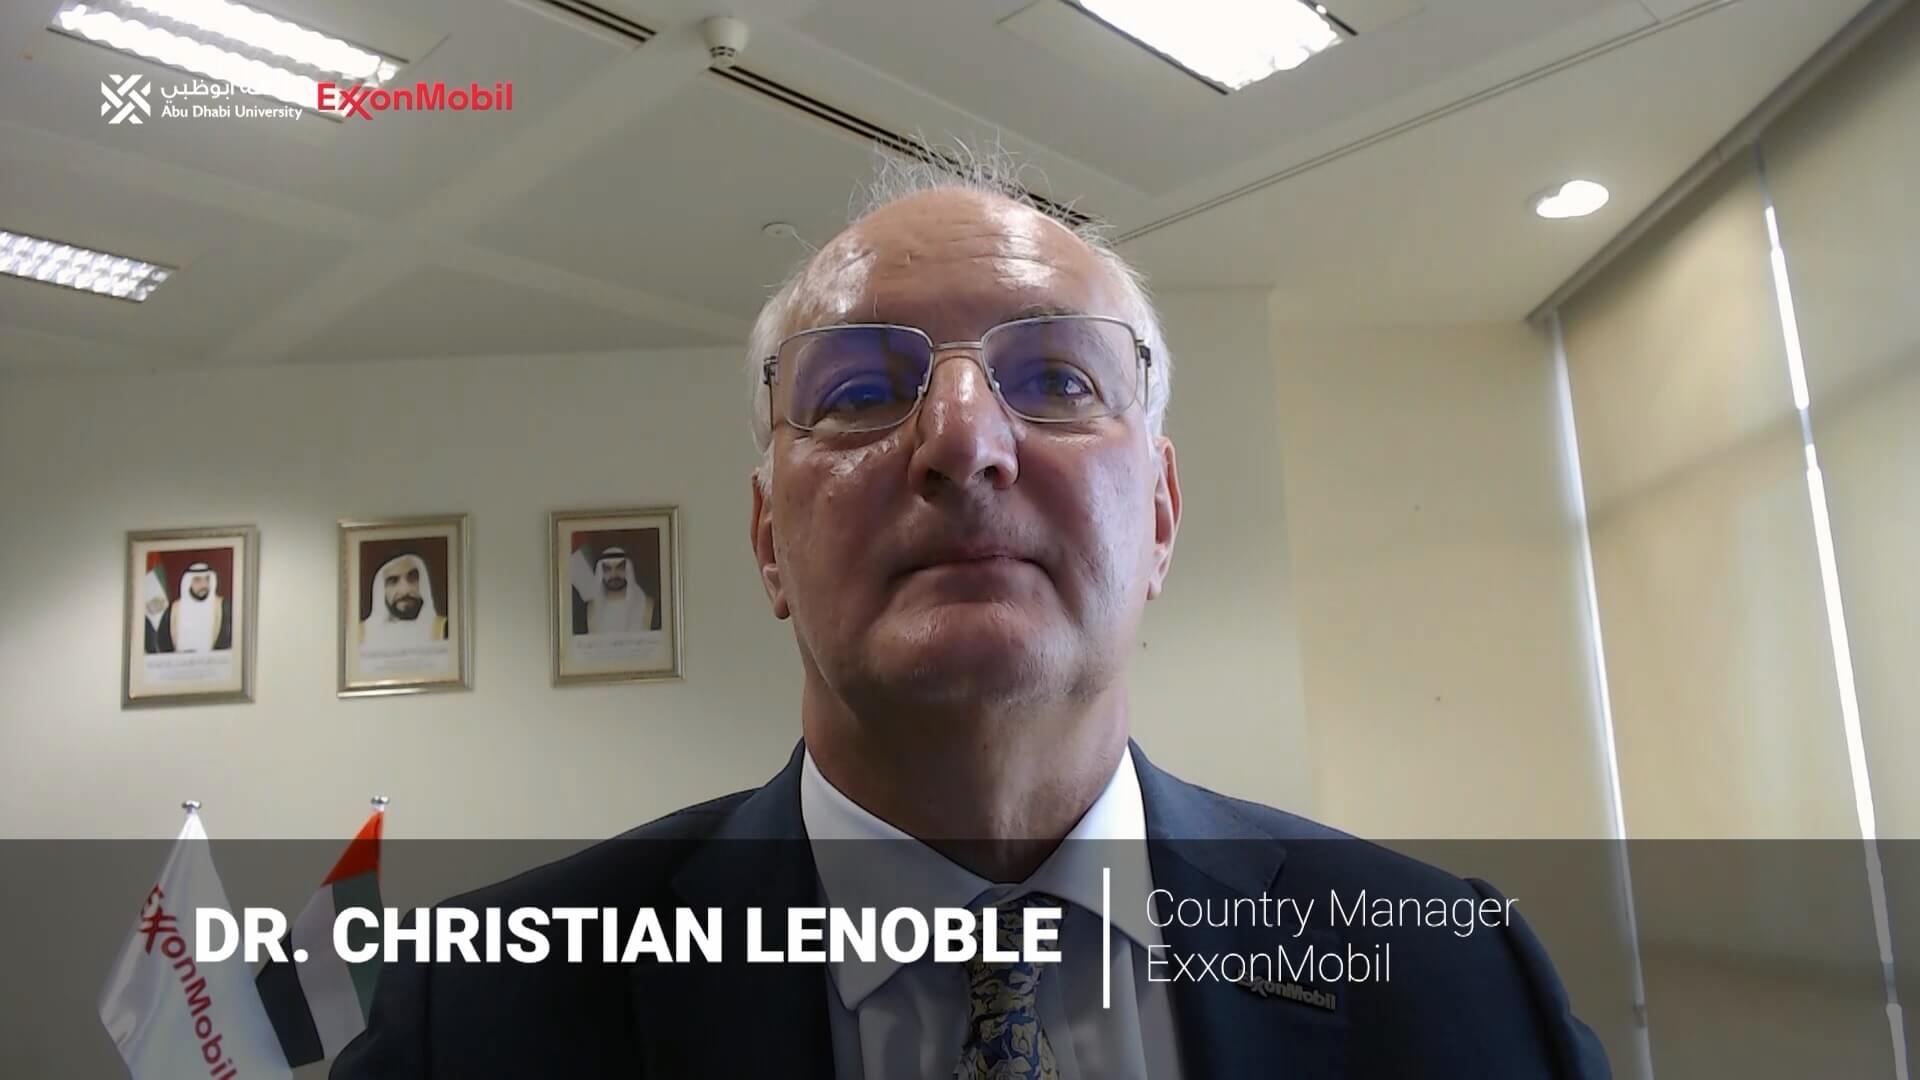 Dr. Christian Lenoble - Country Manager at ExxonMobil